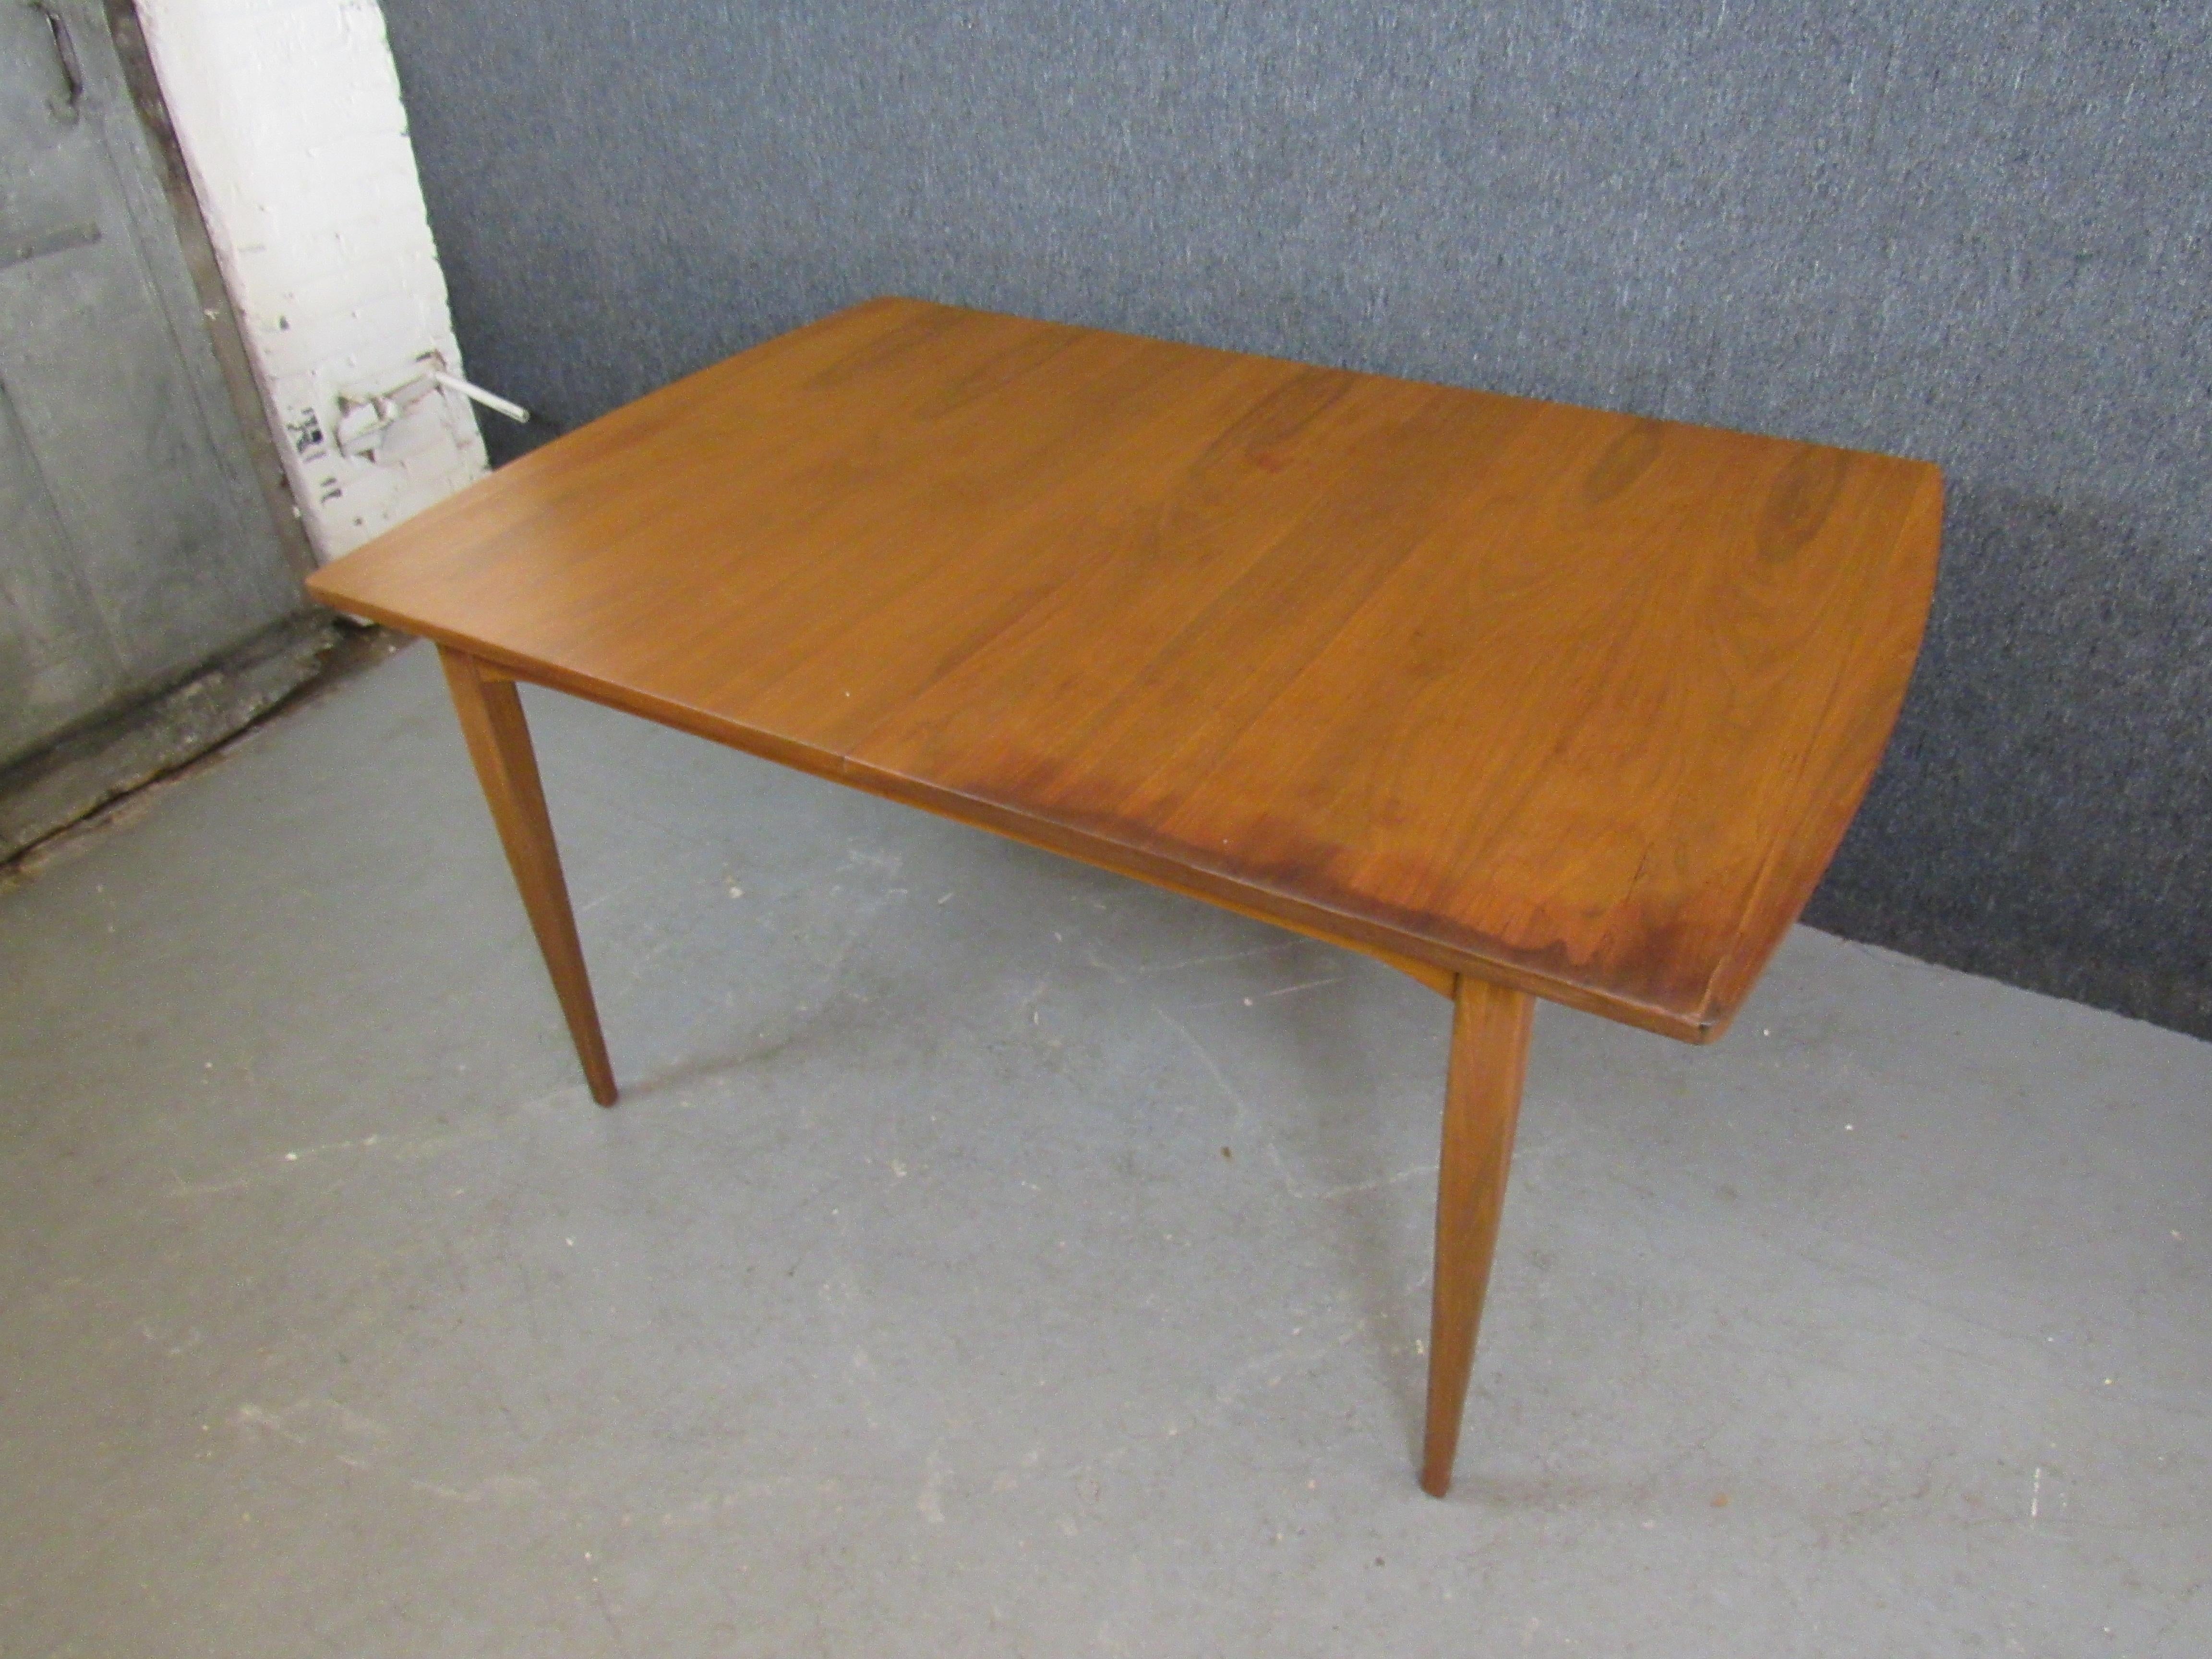 Bring home renowned vintage design with this walnut dining table from Kipp Stewart's iconic 